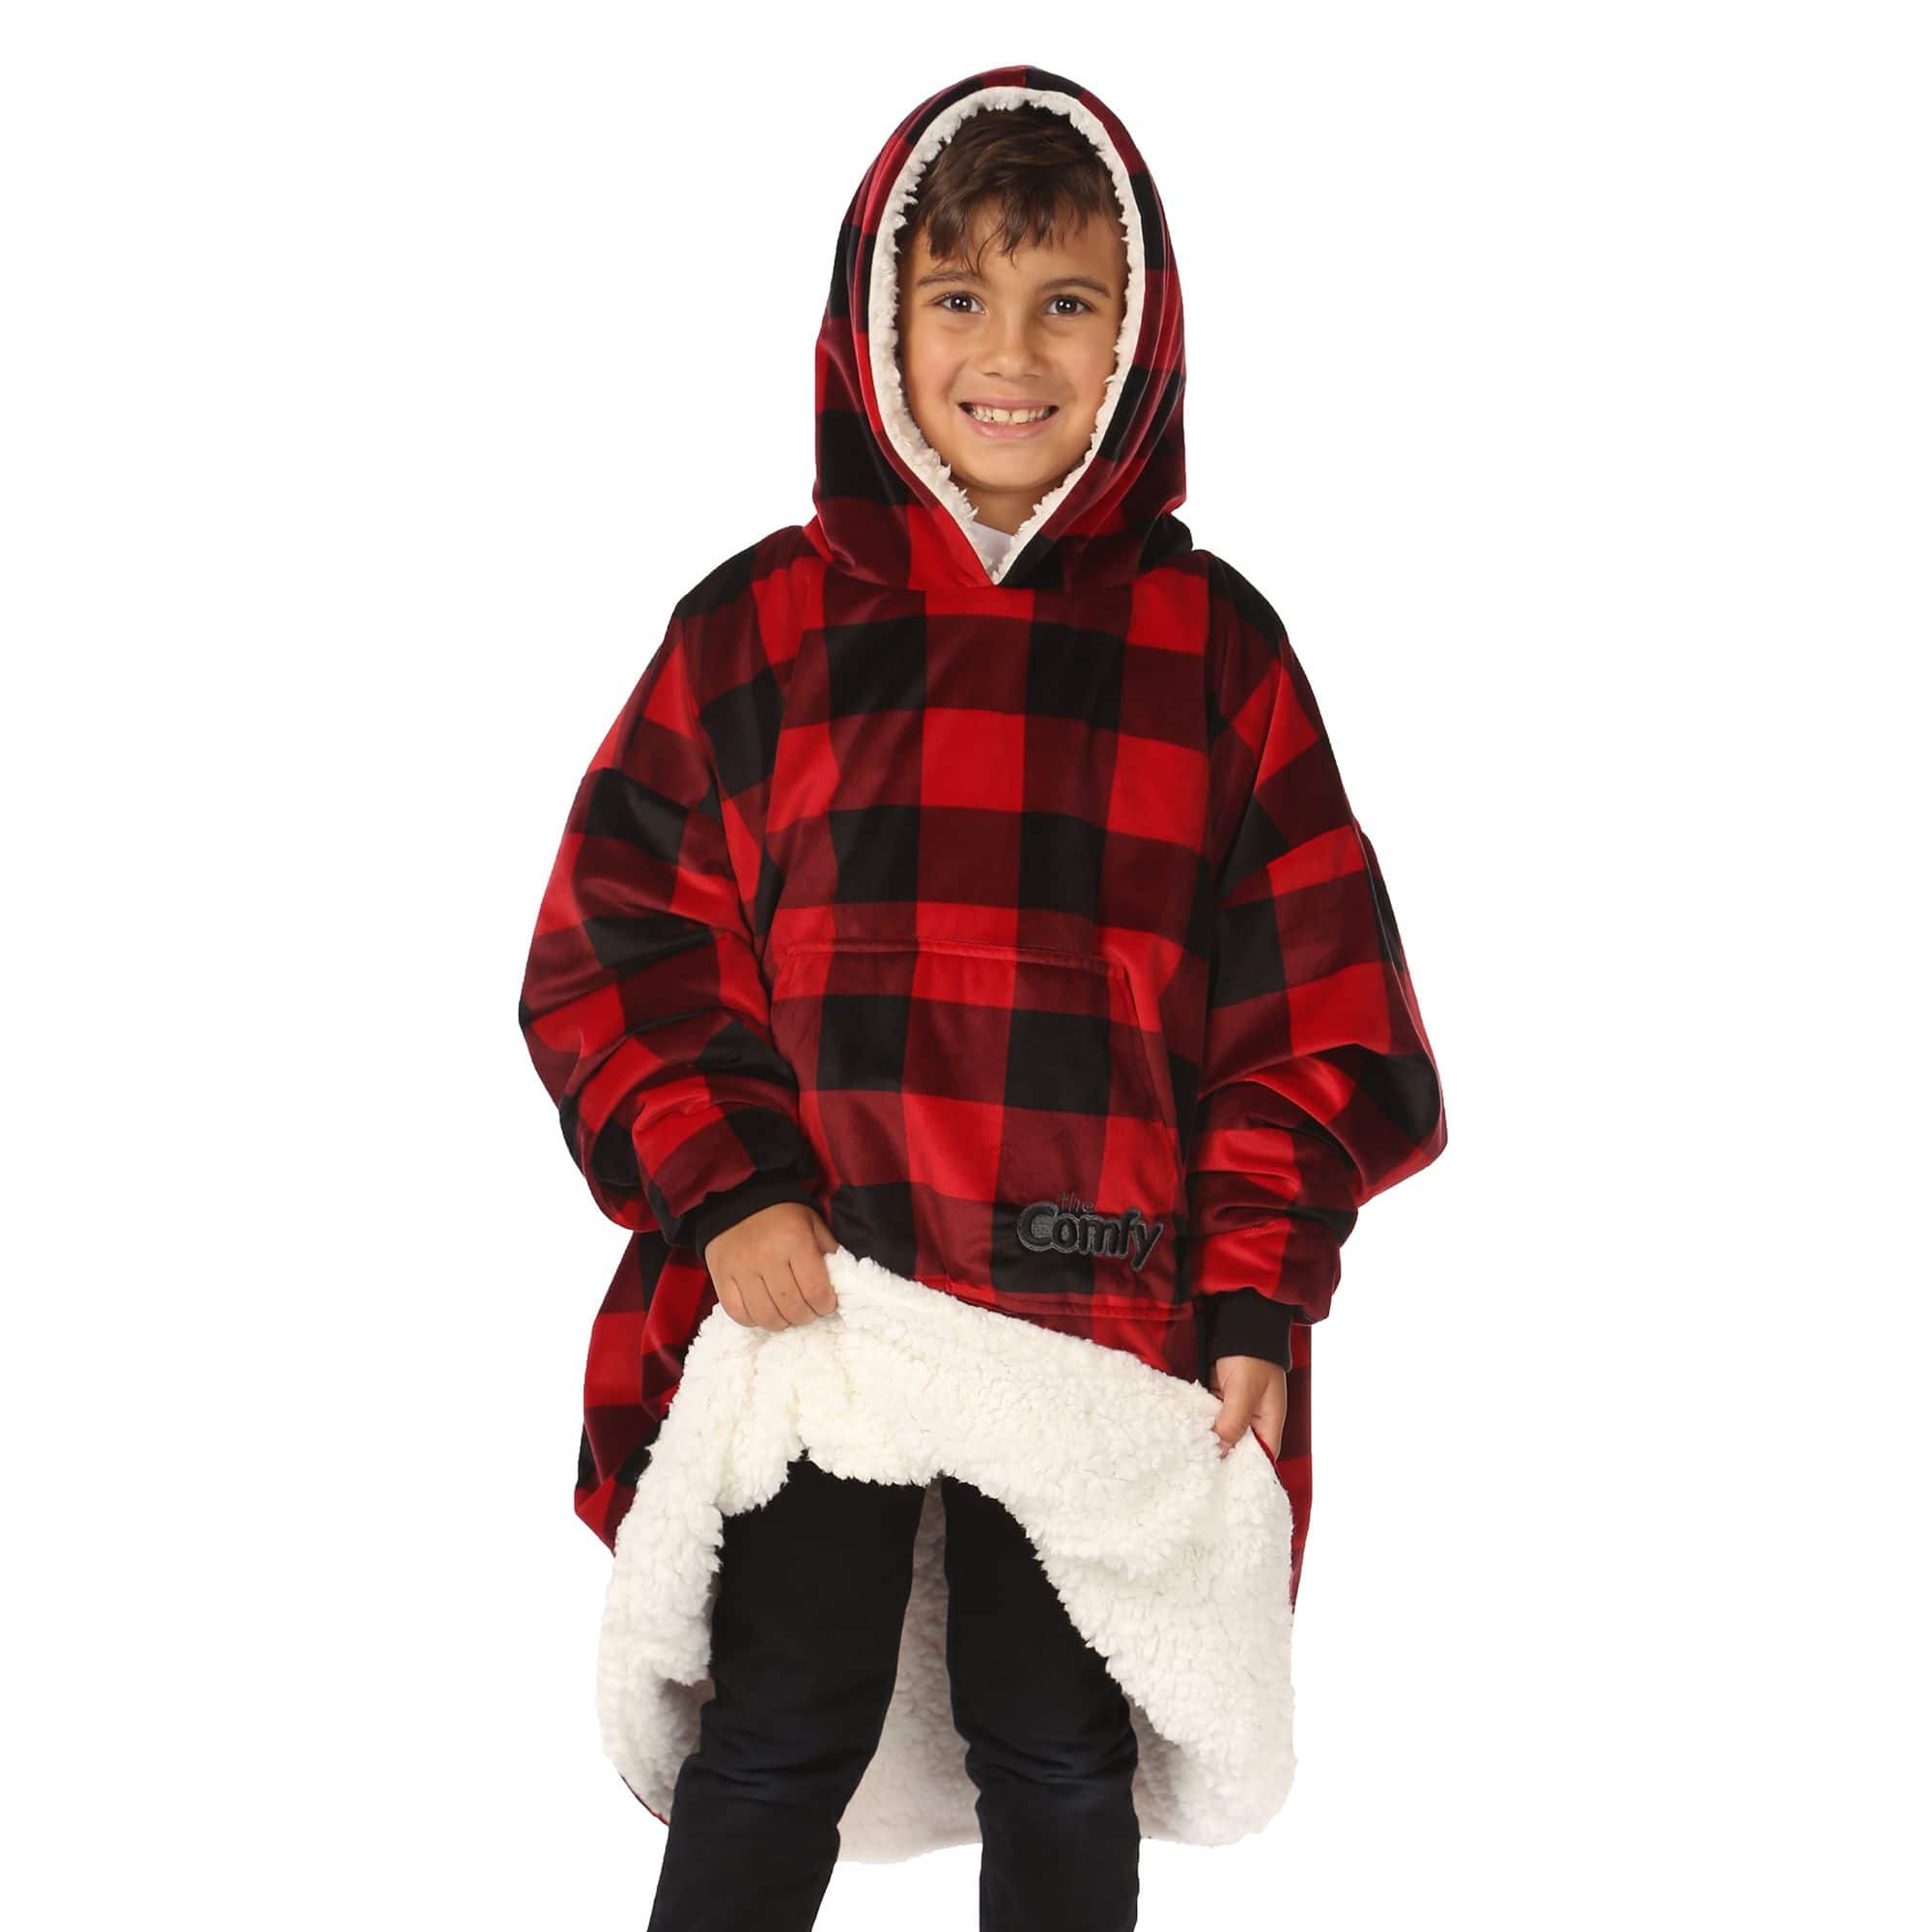 THE COMFY ORIGINAL JR | The Original Oversized Sherpa Blanket for Kids,  Seen On Shark Tank, One Size Fits All Galaxy